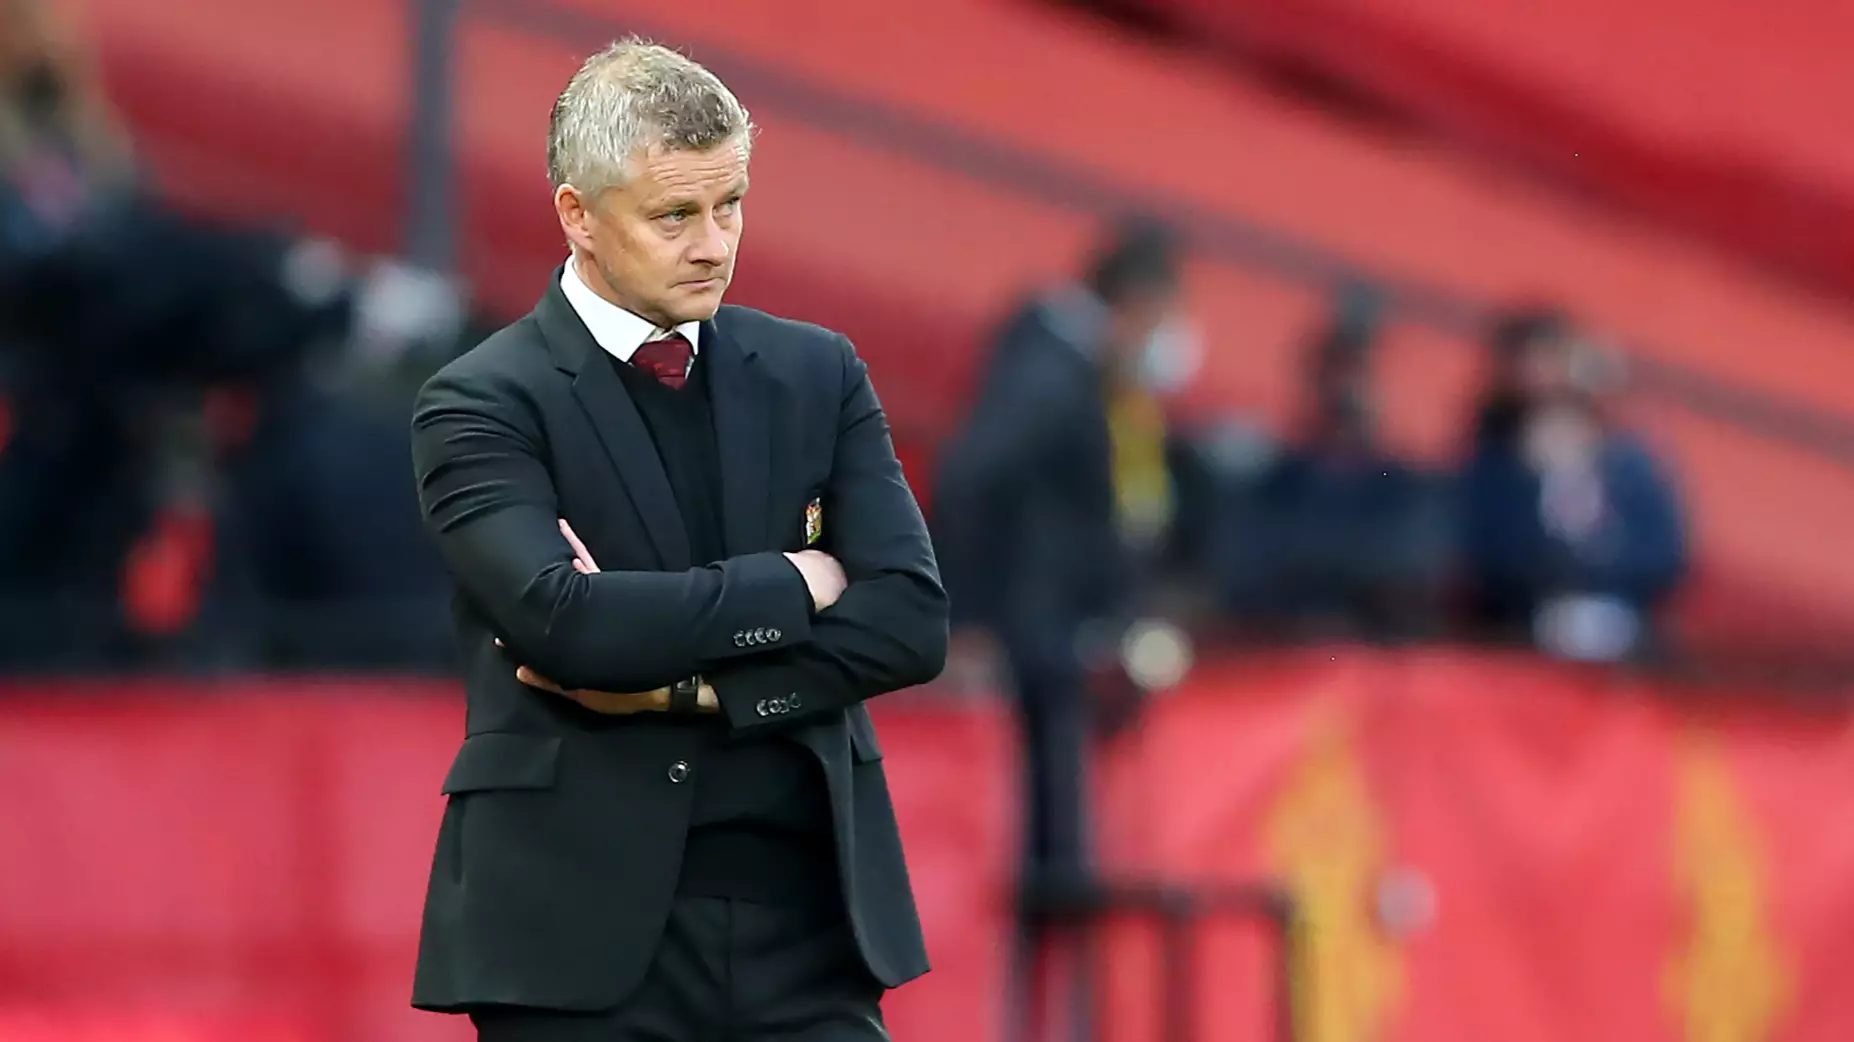 Manchester United Will Keep Faith With Ole Gunnar Solskjaer Even If They Lose To Everton This Weekend, According To Reports